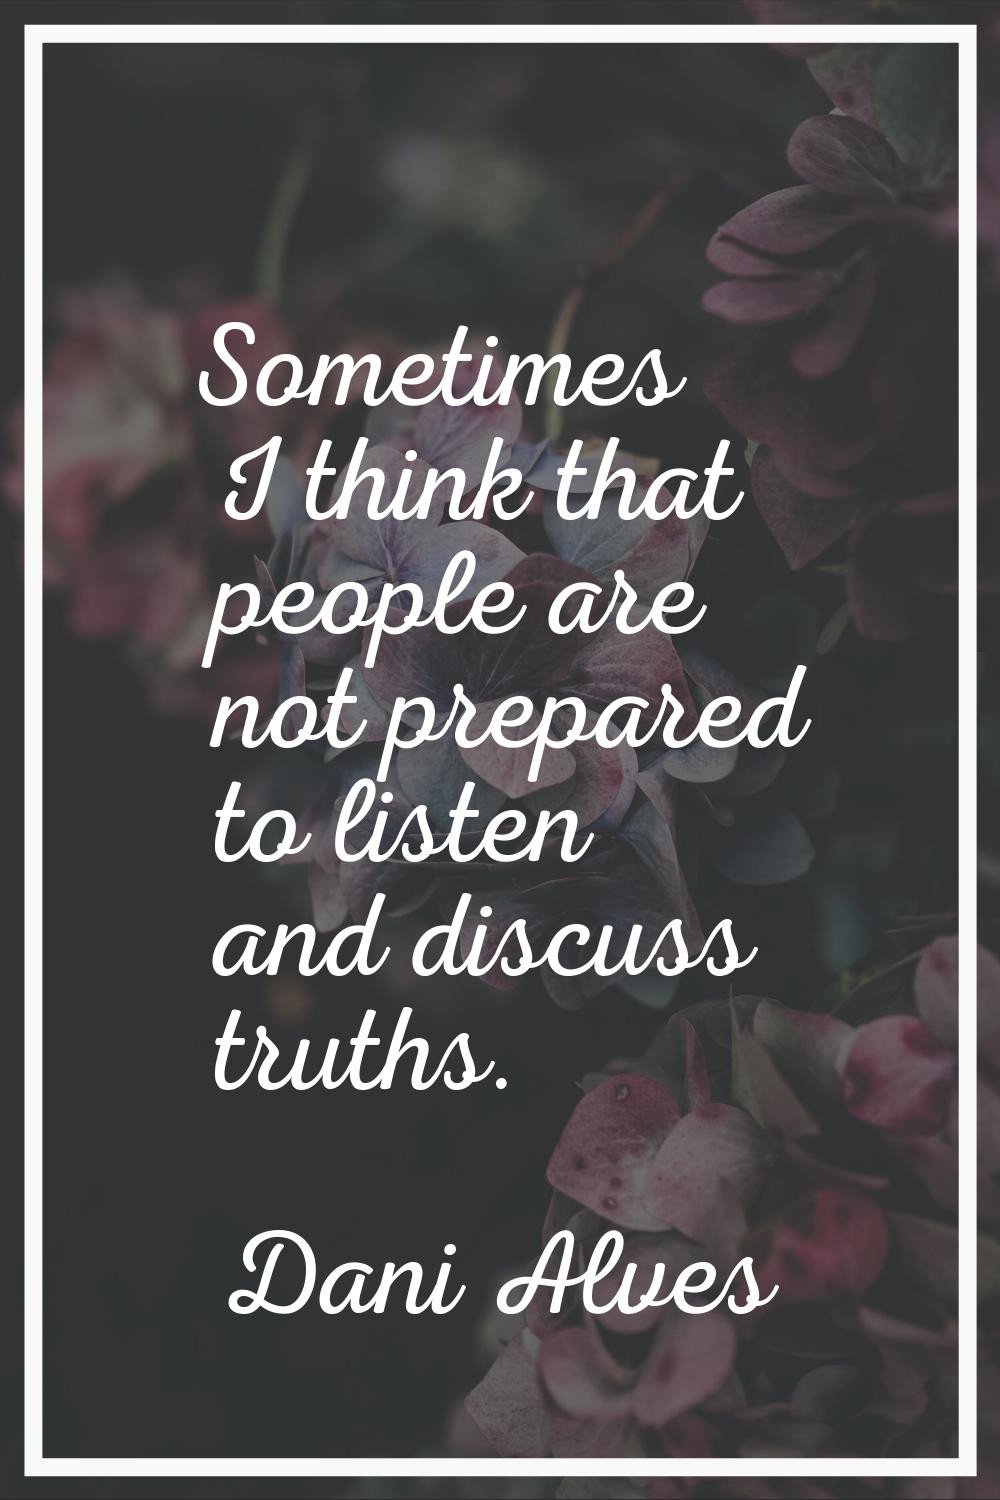 Sometimes I think that people are not prepared to listen and discuss truths.